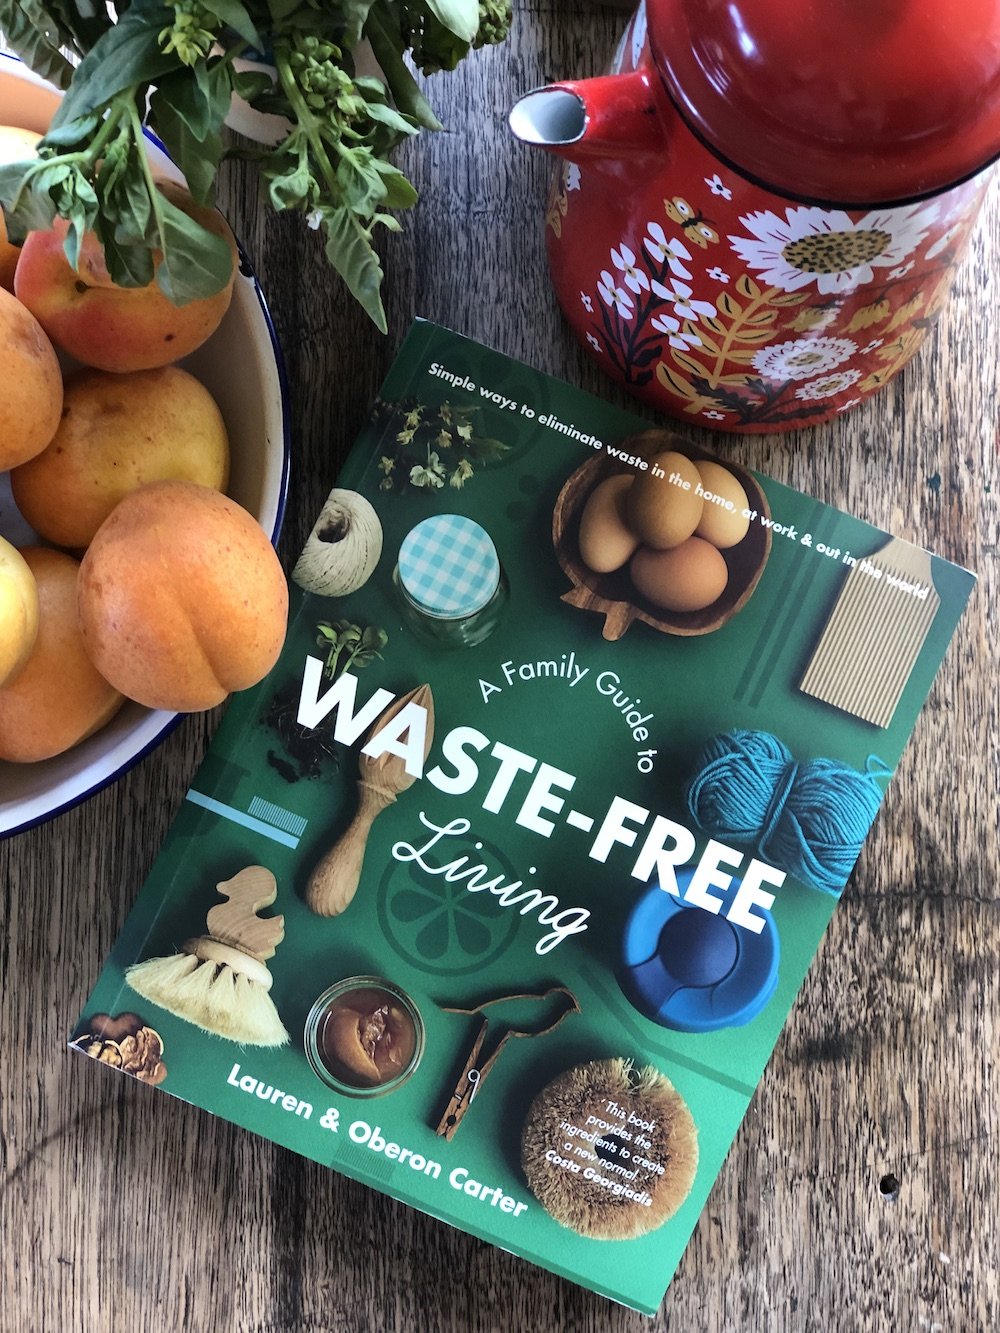 A Family Guide to Waste Free Living by Lauren & Oberon Carter - Stock Your Pantry